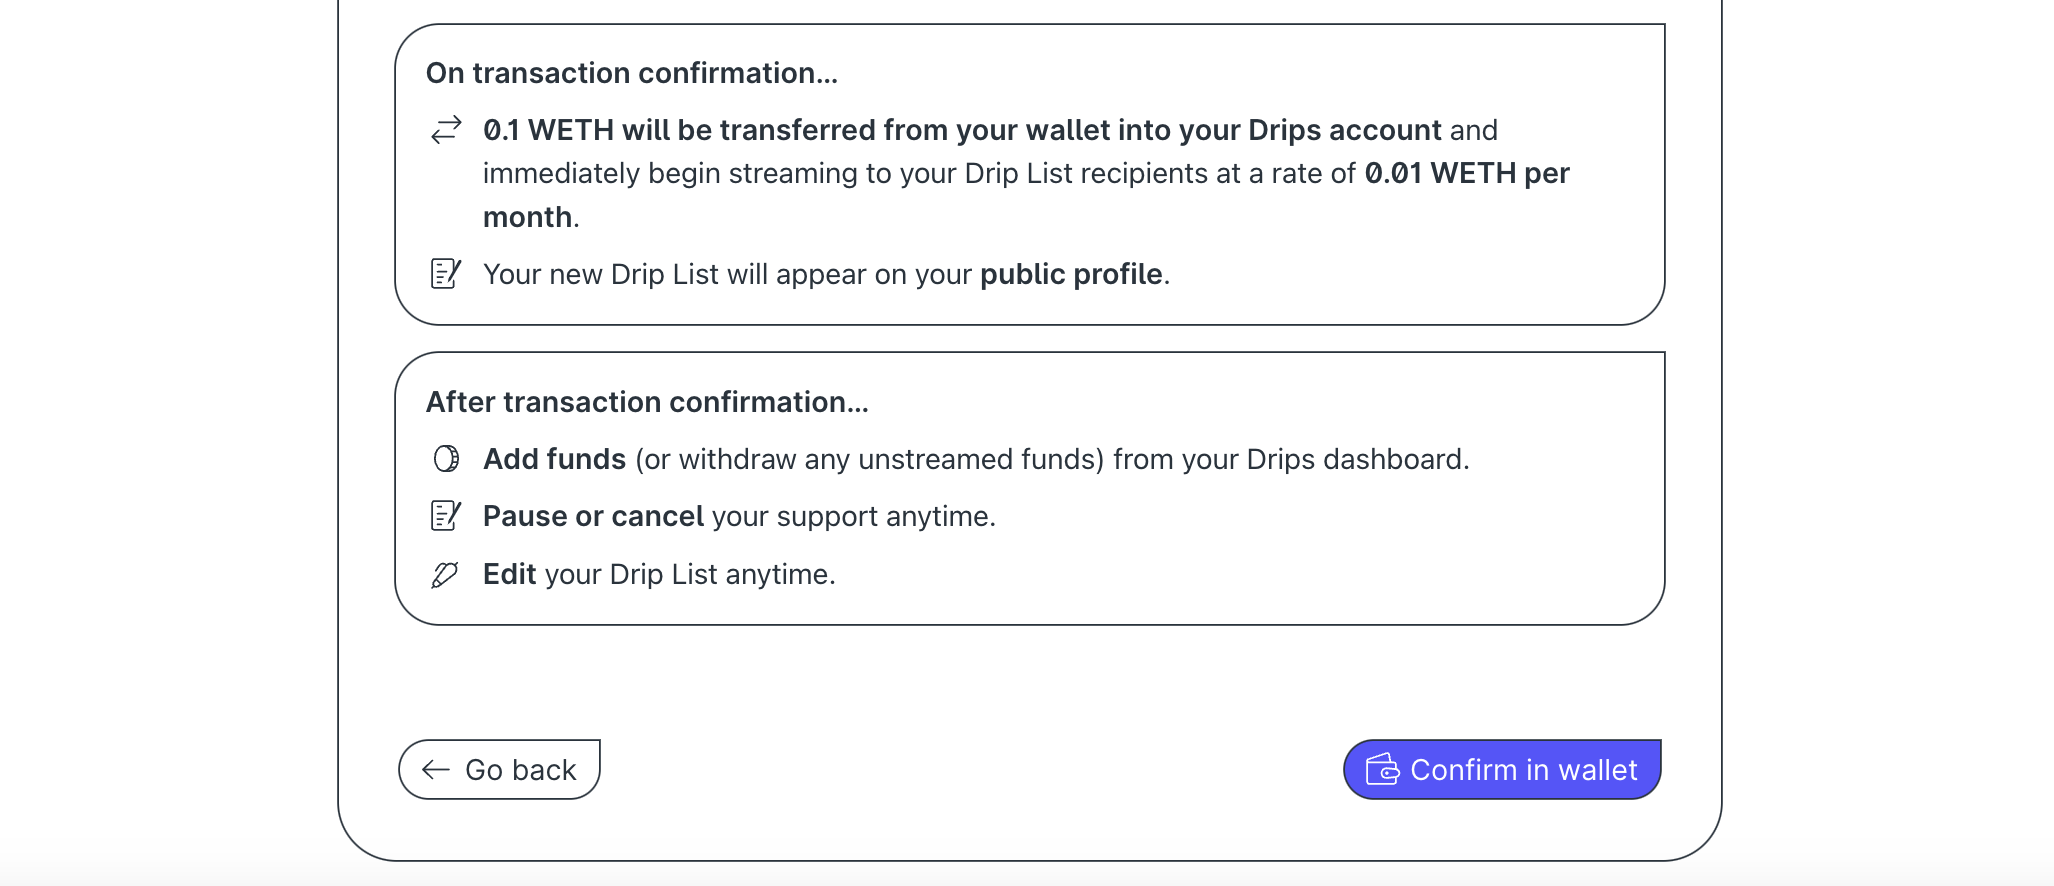 Confirm the details of yur Drip List